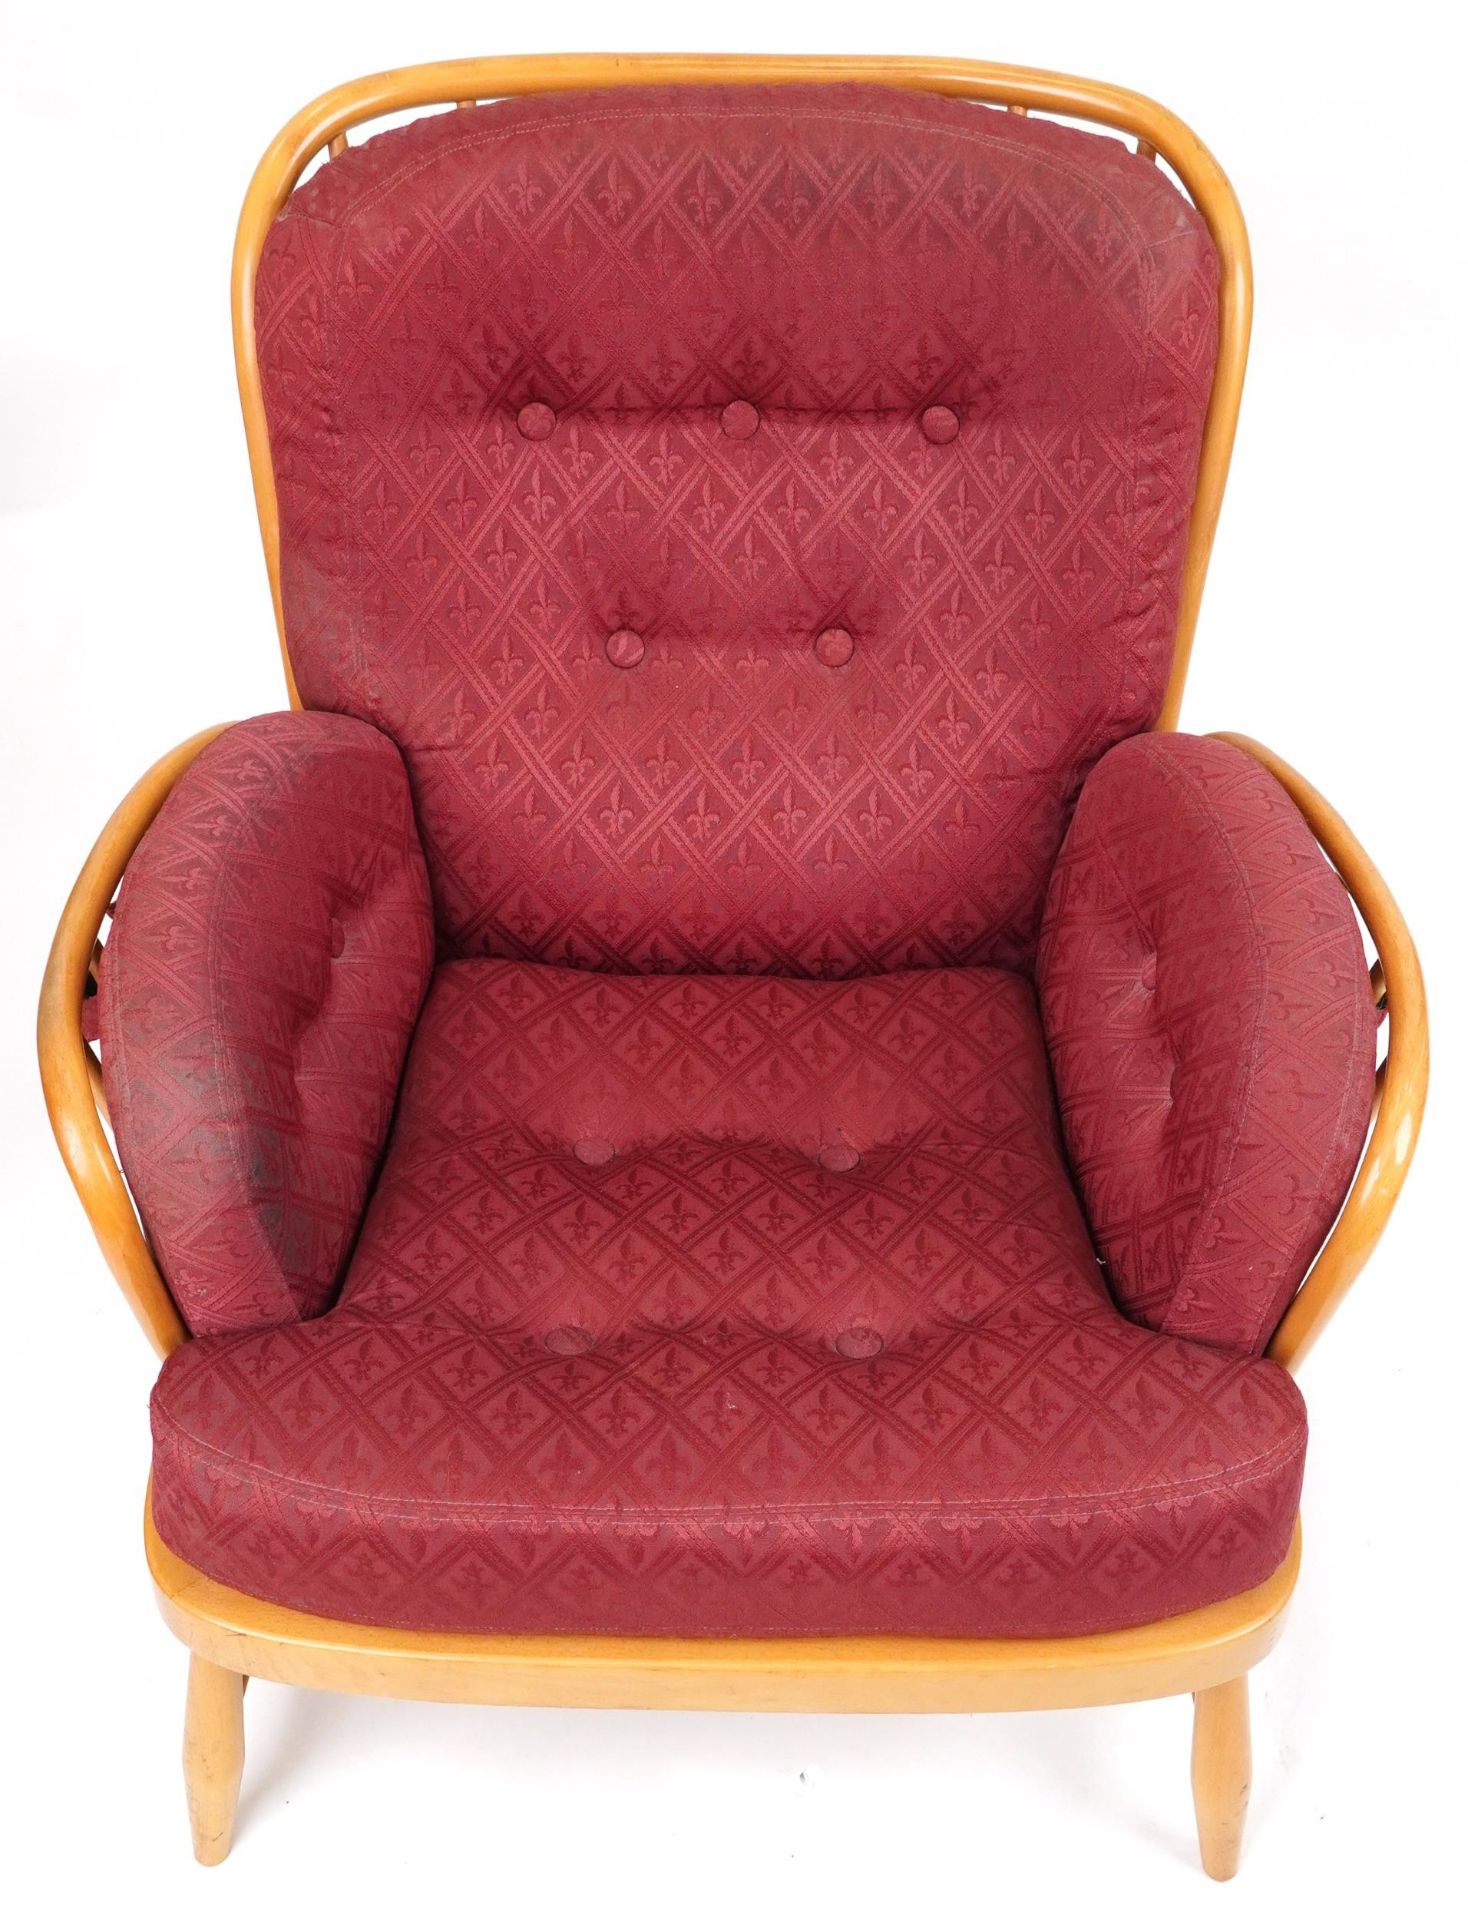 Ercol light elm Jubilee stick back armchair with red fleur de lis upholstered cushioned seats, - Image 3 of 7